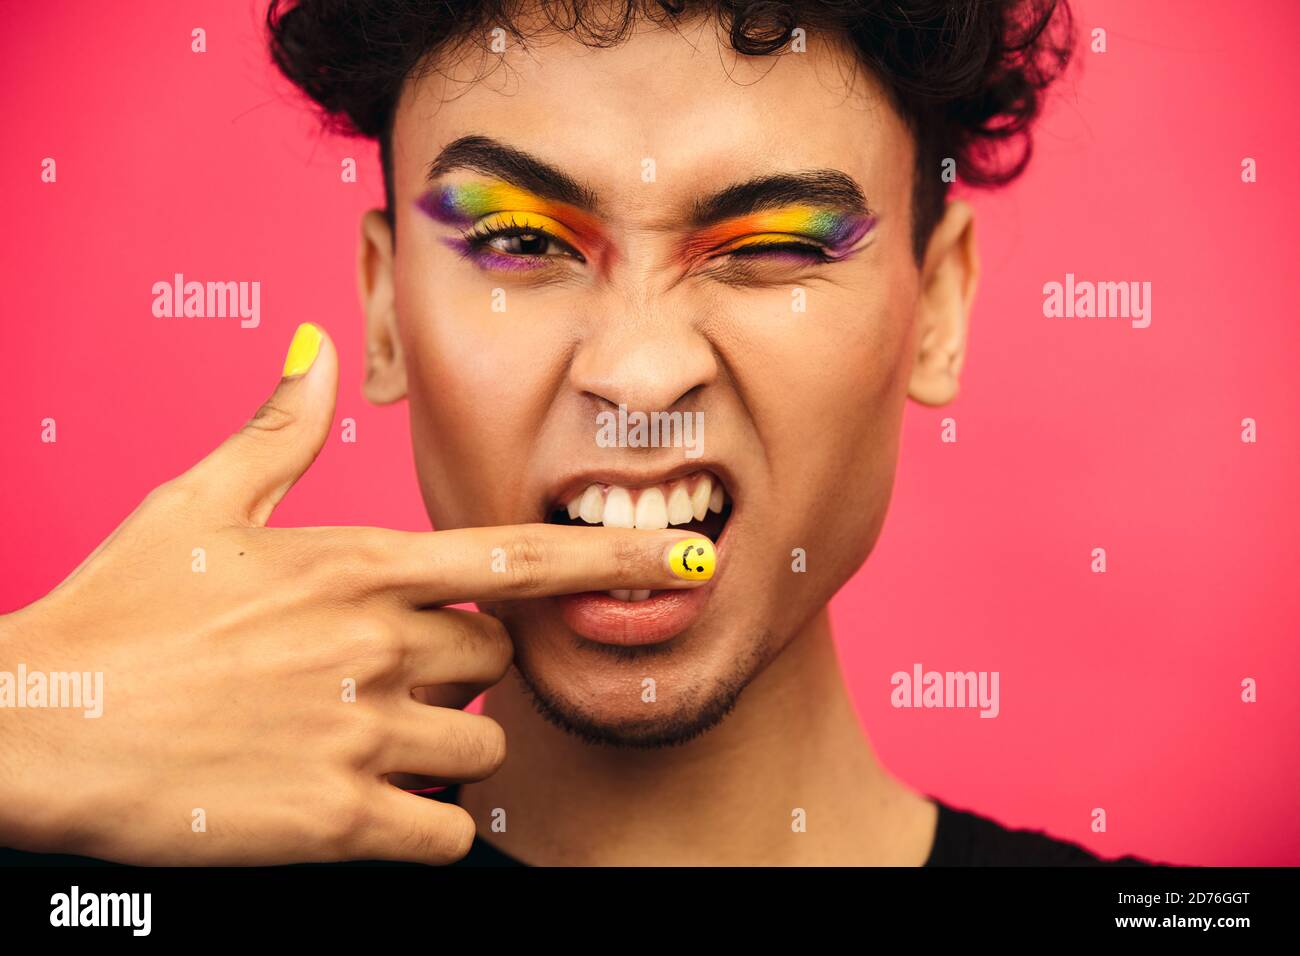 Close-up of a transgender male biting his finger and winking an eye. Gender fluid man wearing rainbow colored eye shadow and smiley face fingernail. Stock Photo